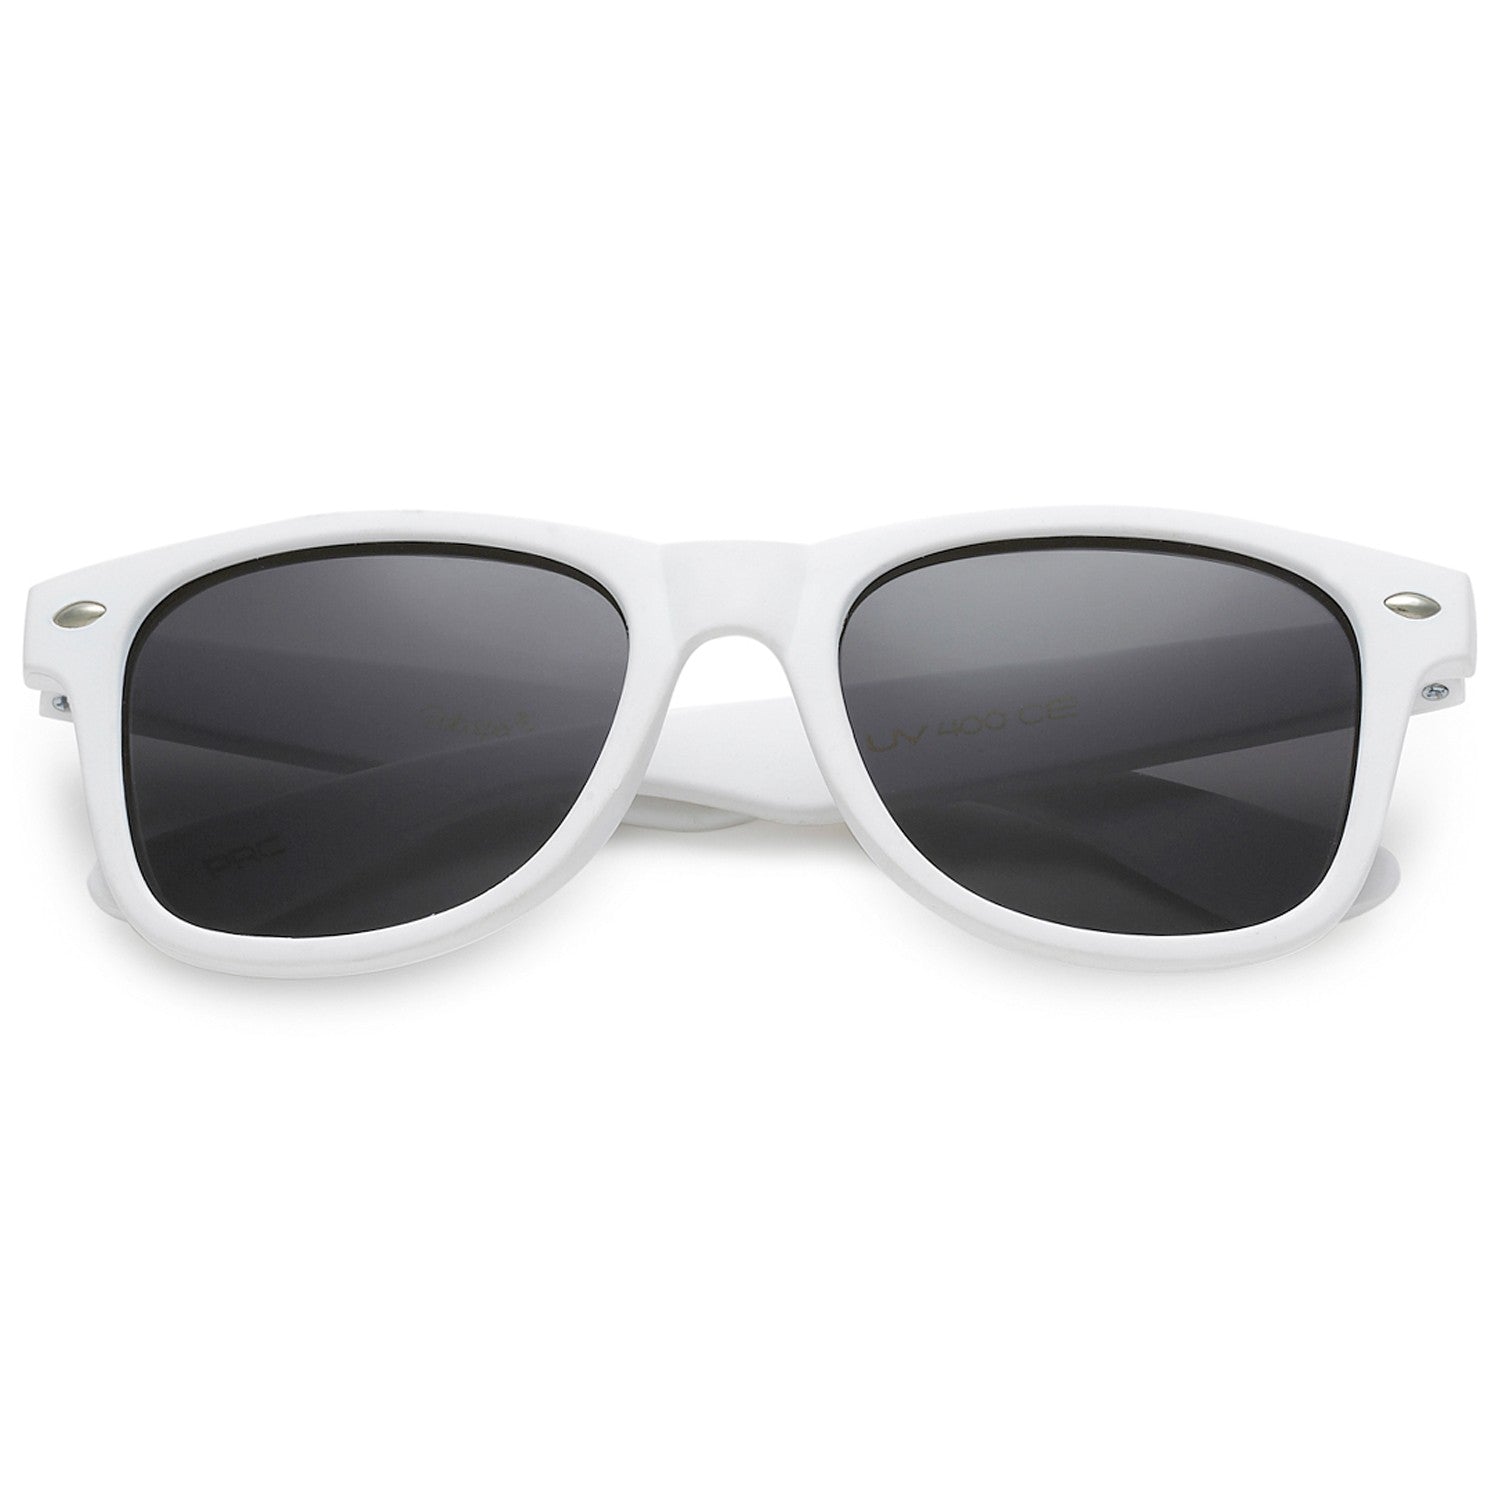 Polarspex Polarized 80's Retro Style Kids Sunglasses with Rubberized Soft White Frames and Polarized Smoke Lenses for Boys and Girls